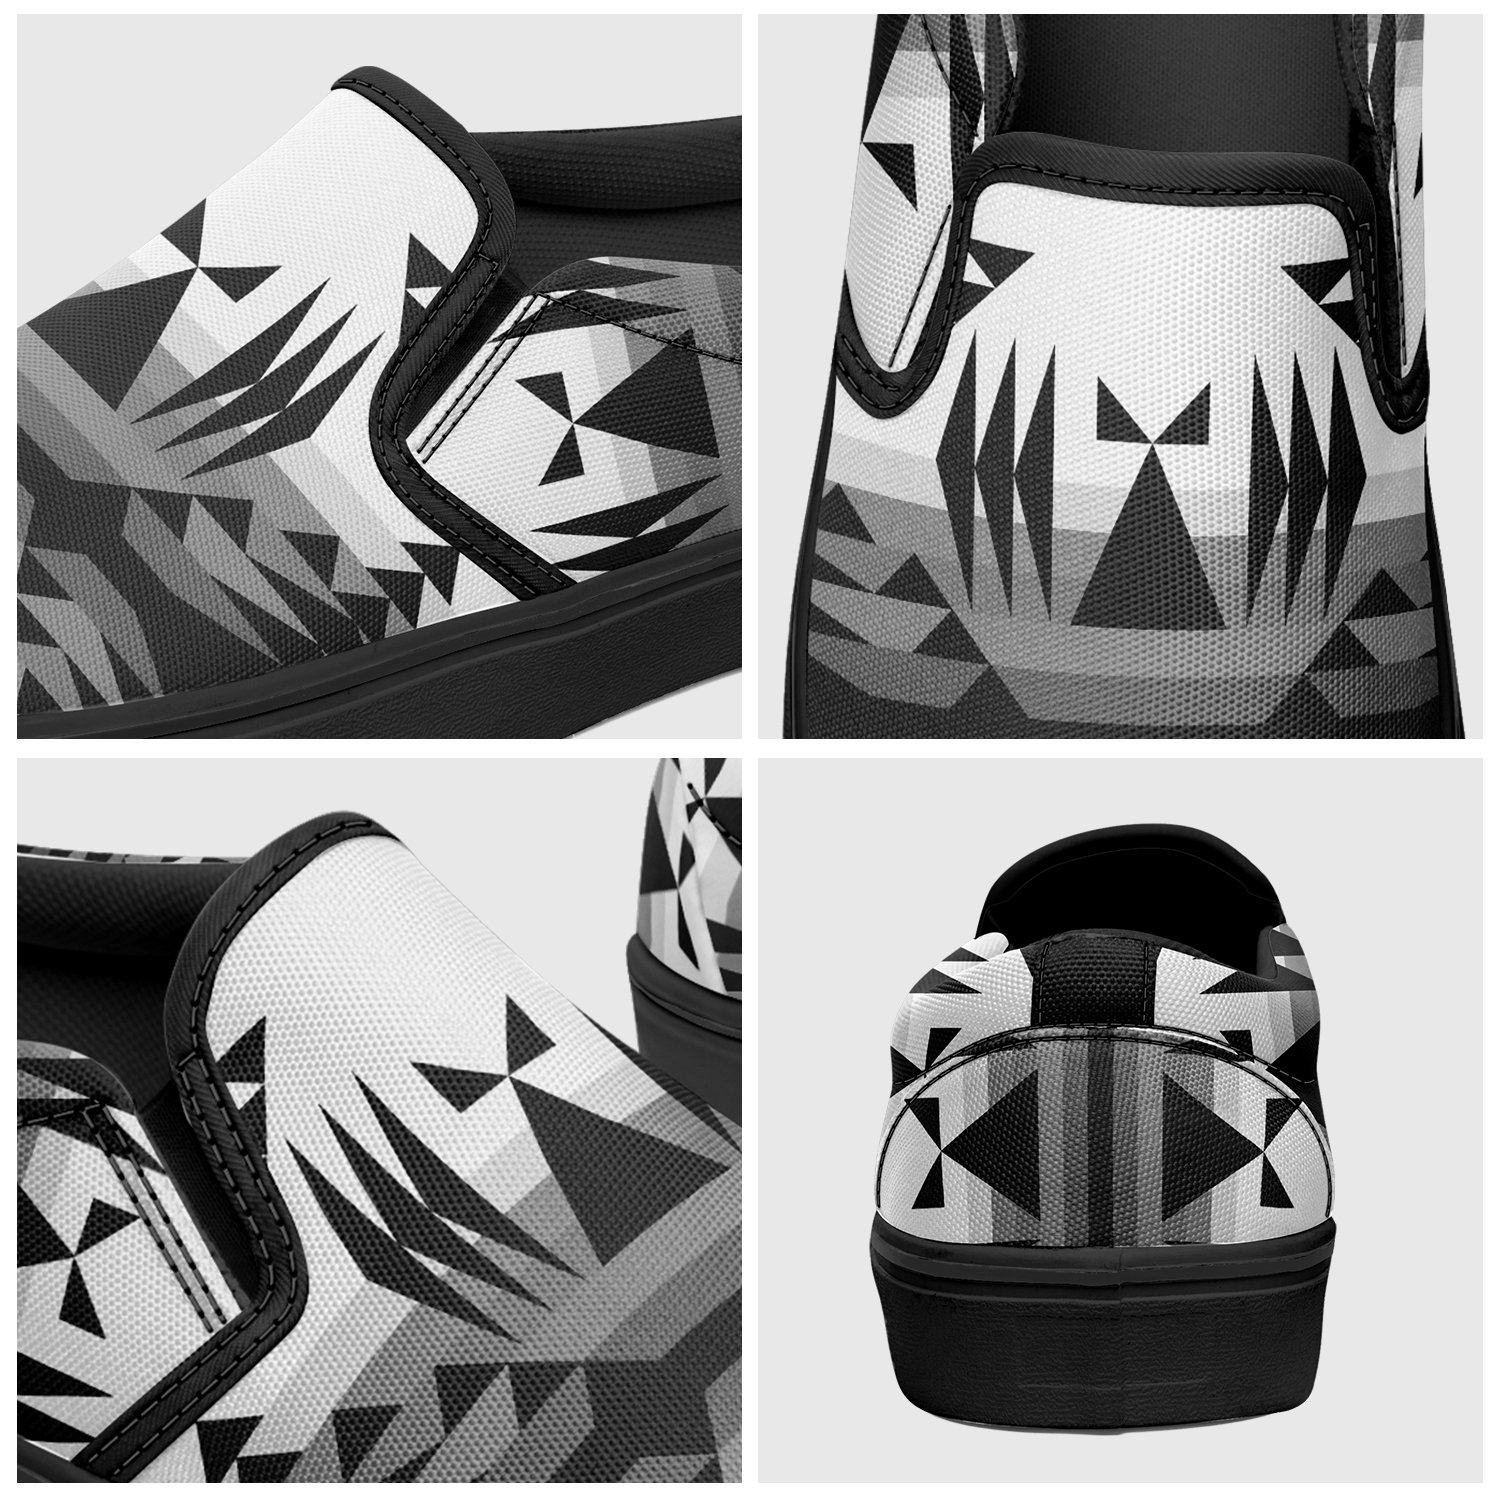 Between the Mountains White and Black Otoyimm Canvas Slip On Shoes 49 Dzine 